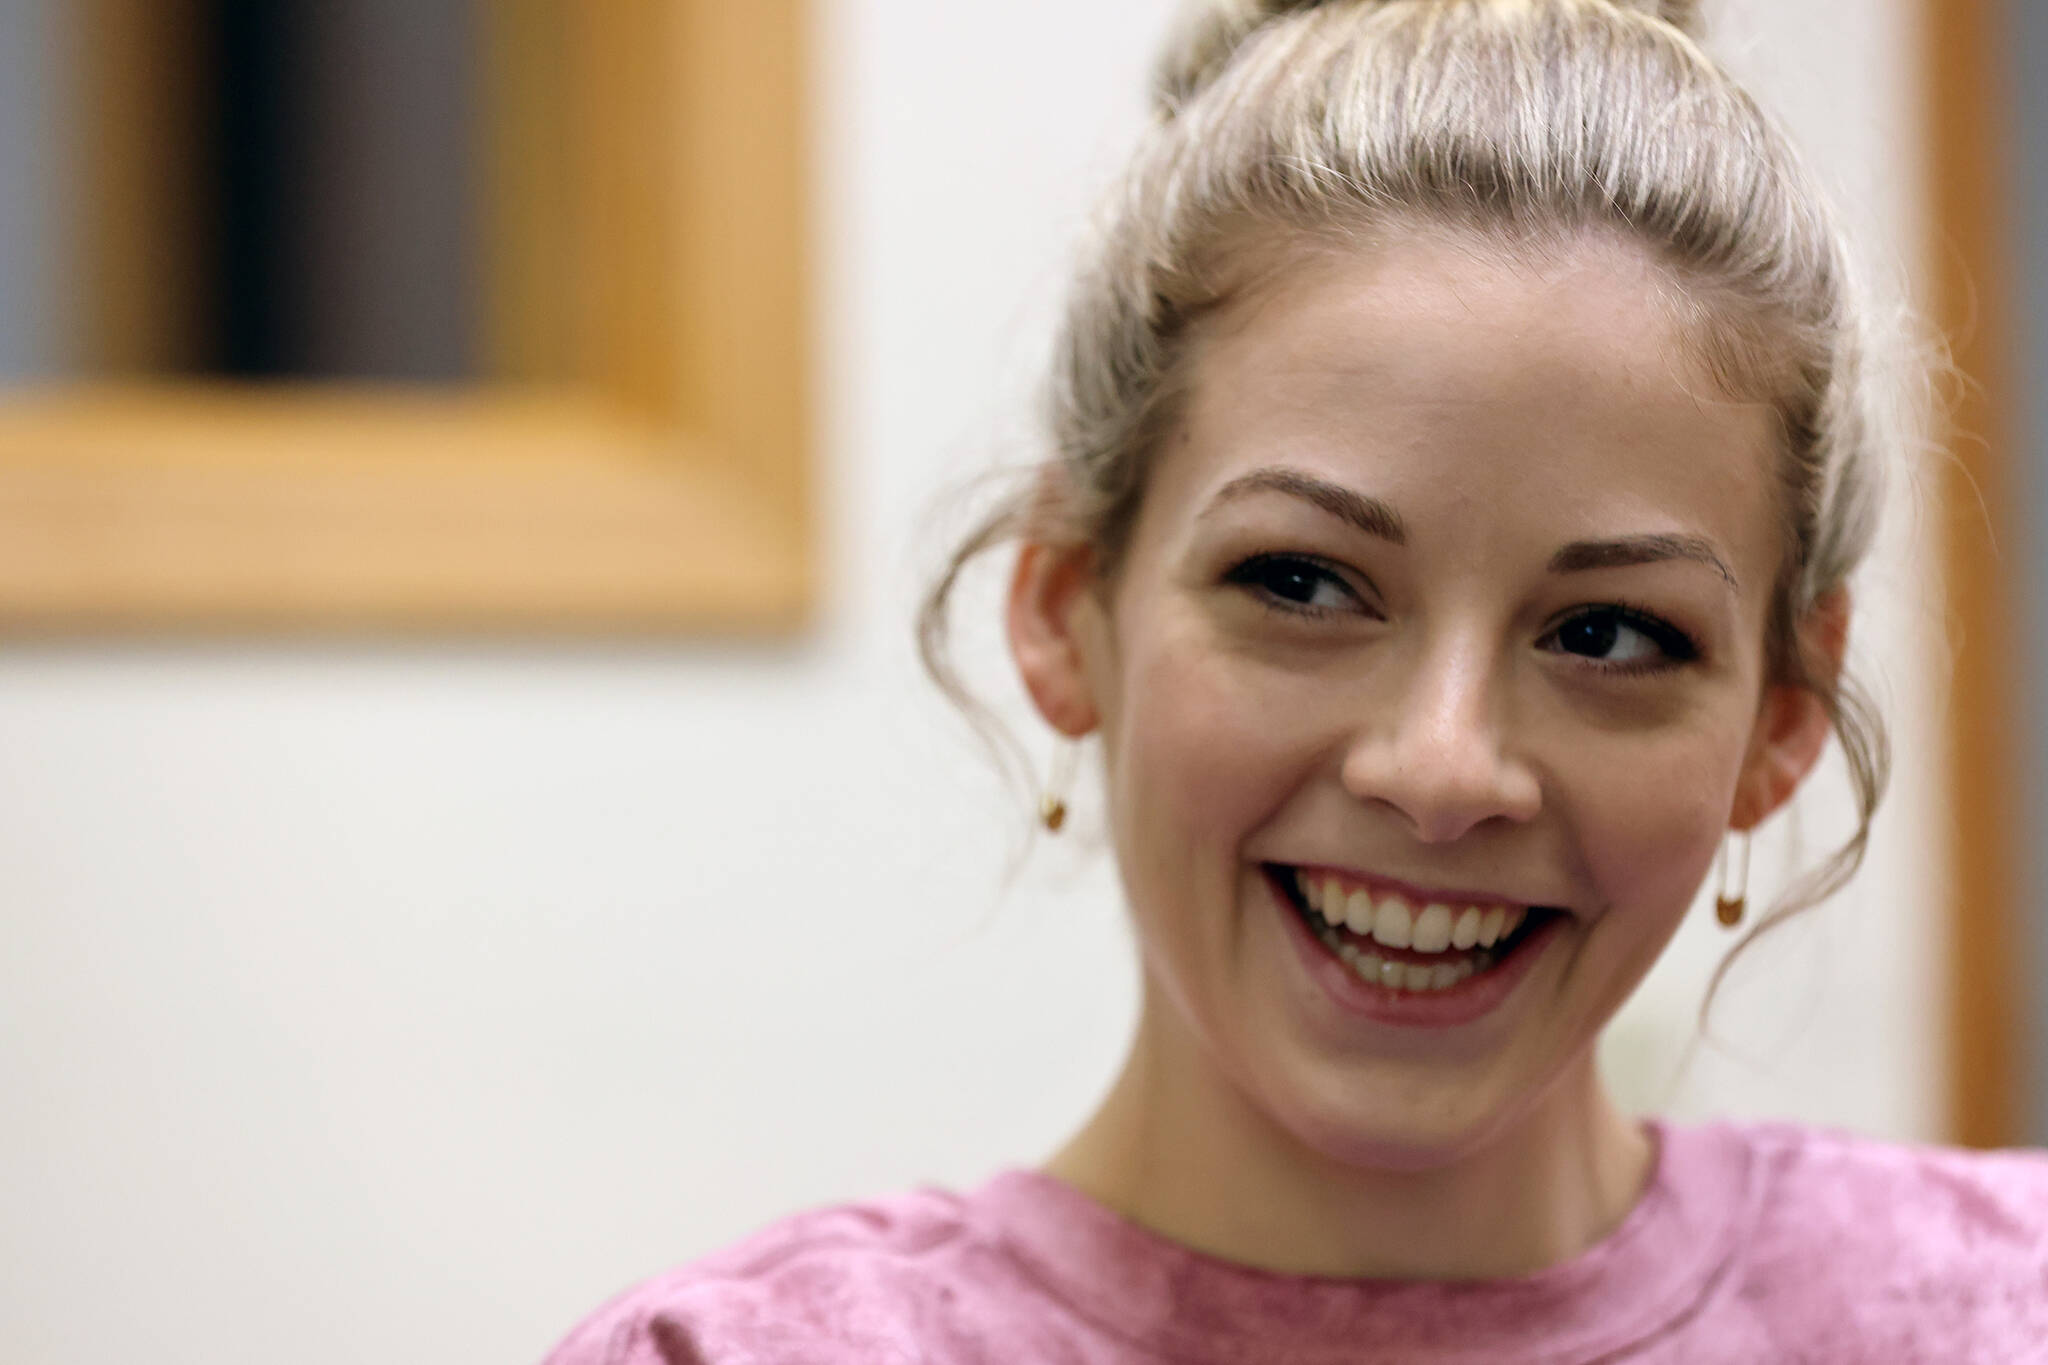 Ben Hohenstatt / Juneau Empire
Two-time national champion and Olympic bronze medalist Gracie Gold talks with the Juneau Empire ahead of her upcoming free speech at Juneau-Douglas High School on Saturday, Sept. 10 at 6 p.m.